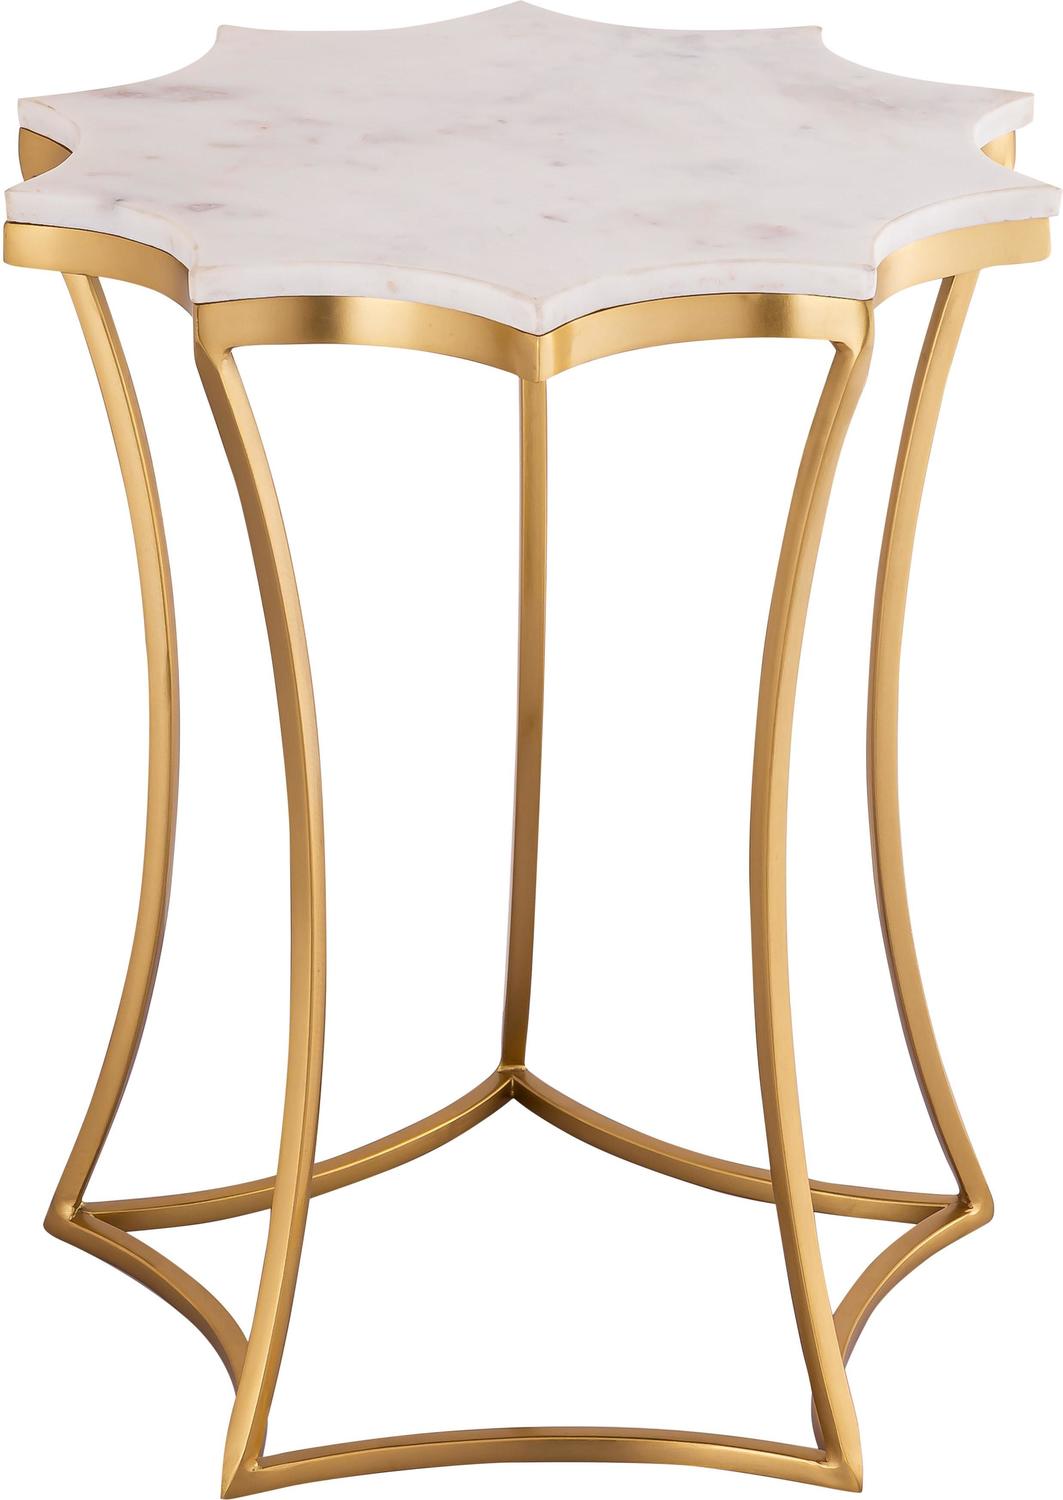 side table end table Tov Furniture Side Tables Gold,White Marble